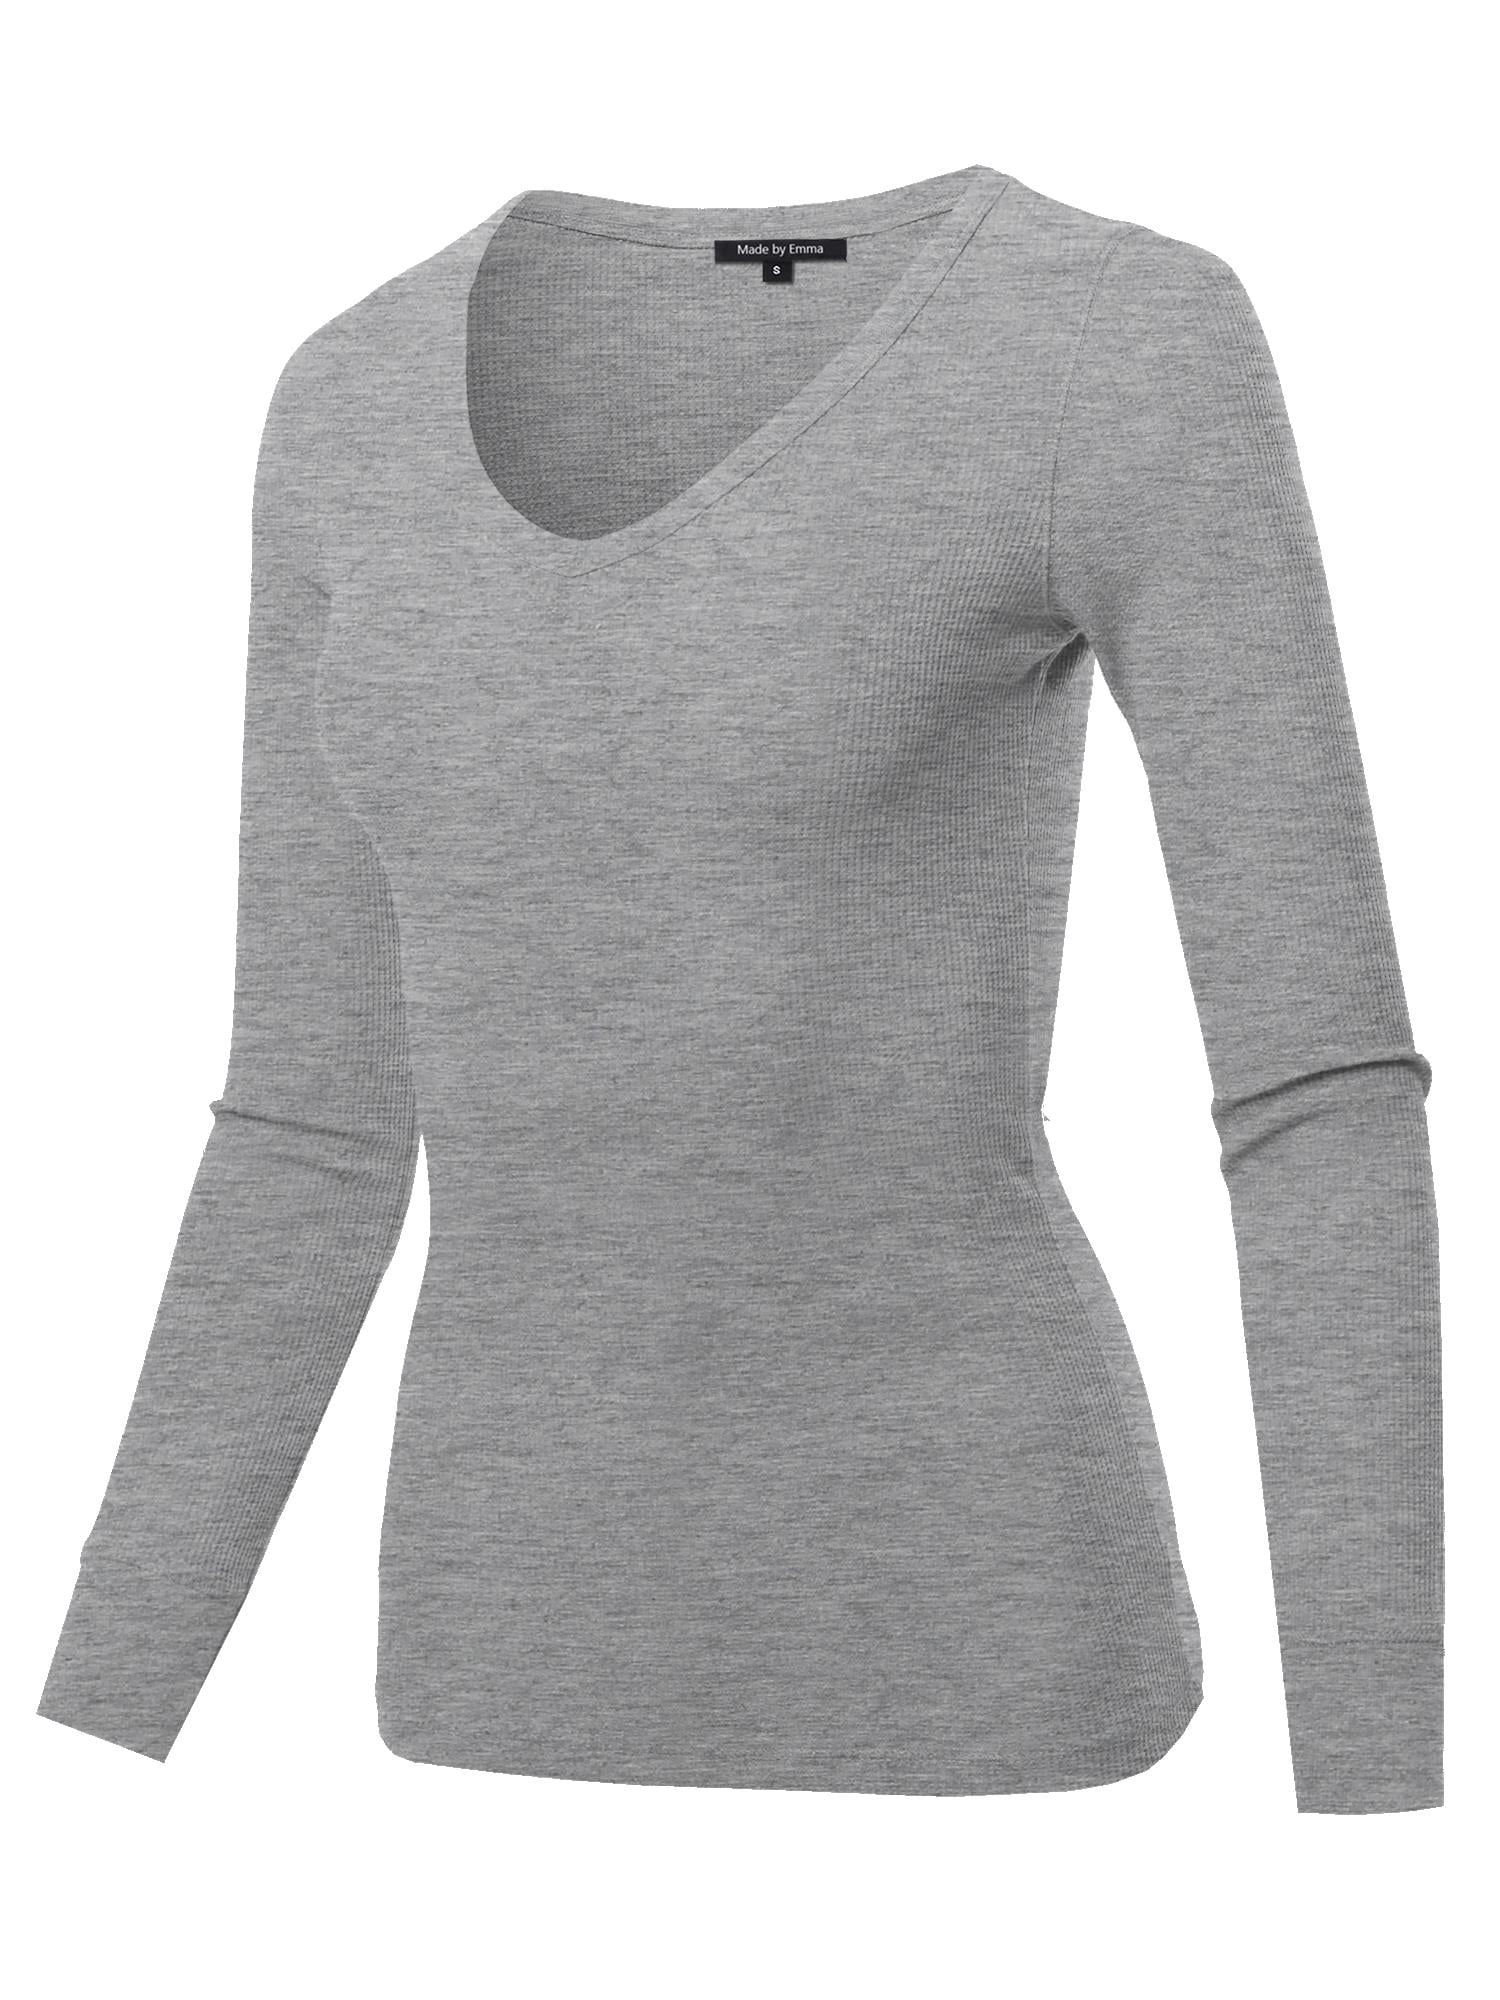 FashionOutfit Women's Basic Casual Solid Long Sleeve V-neck Thermal ...